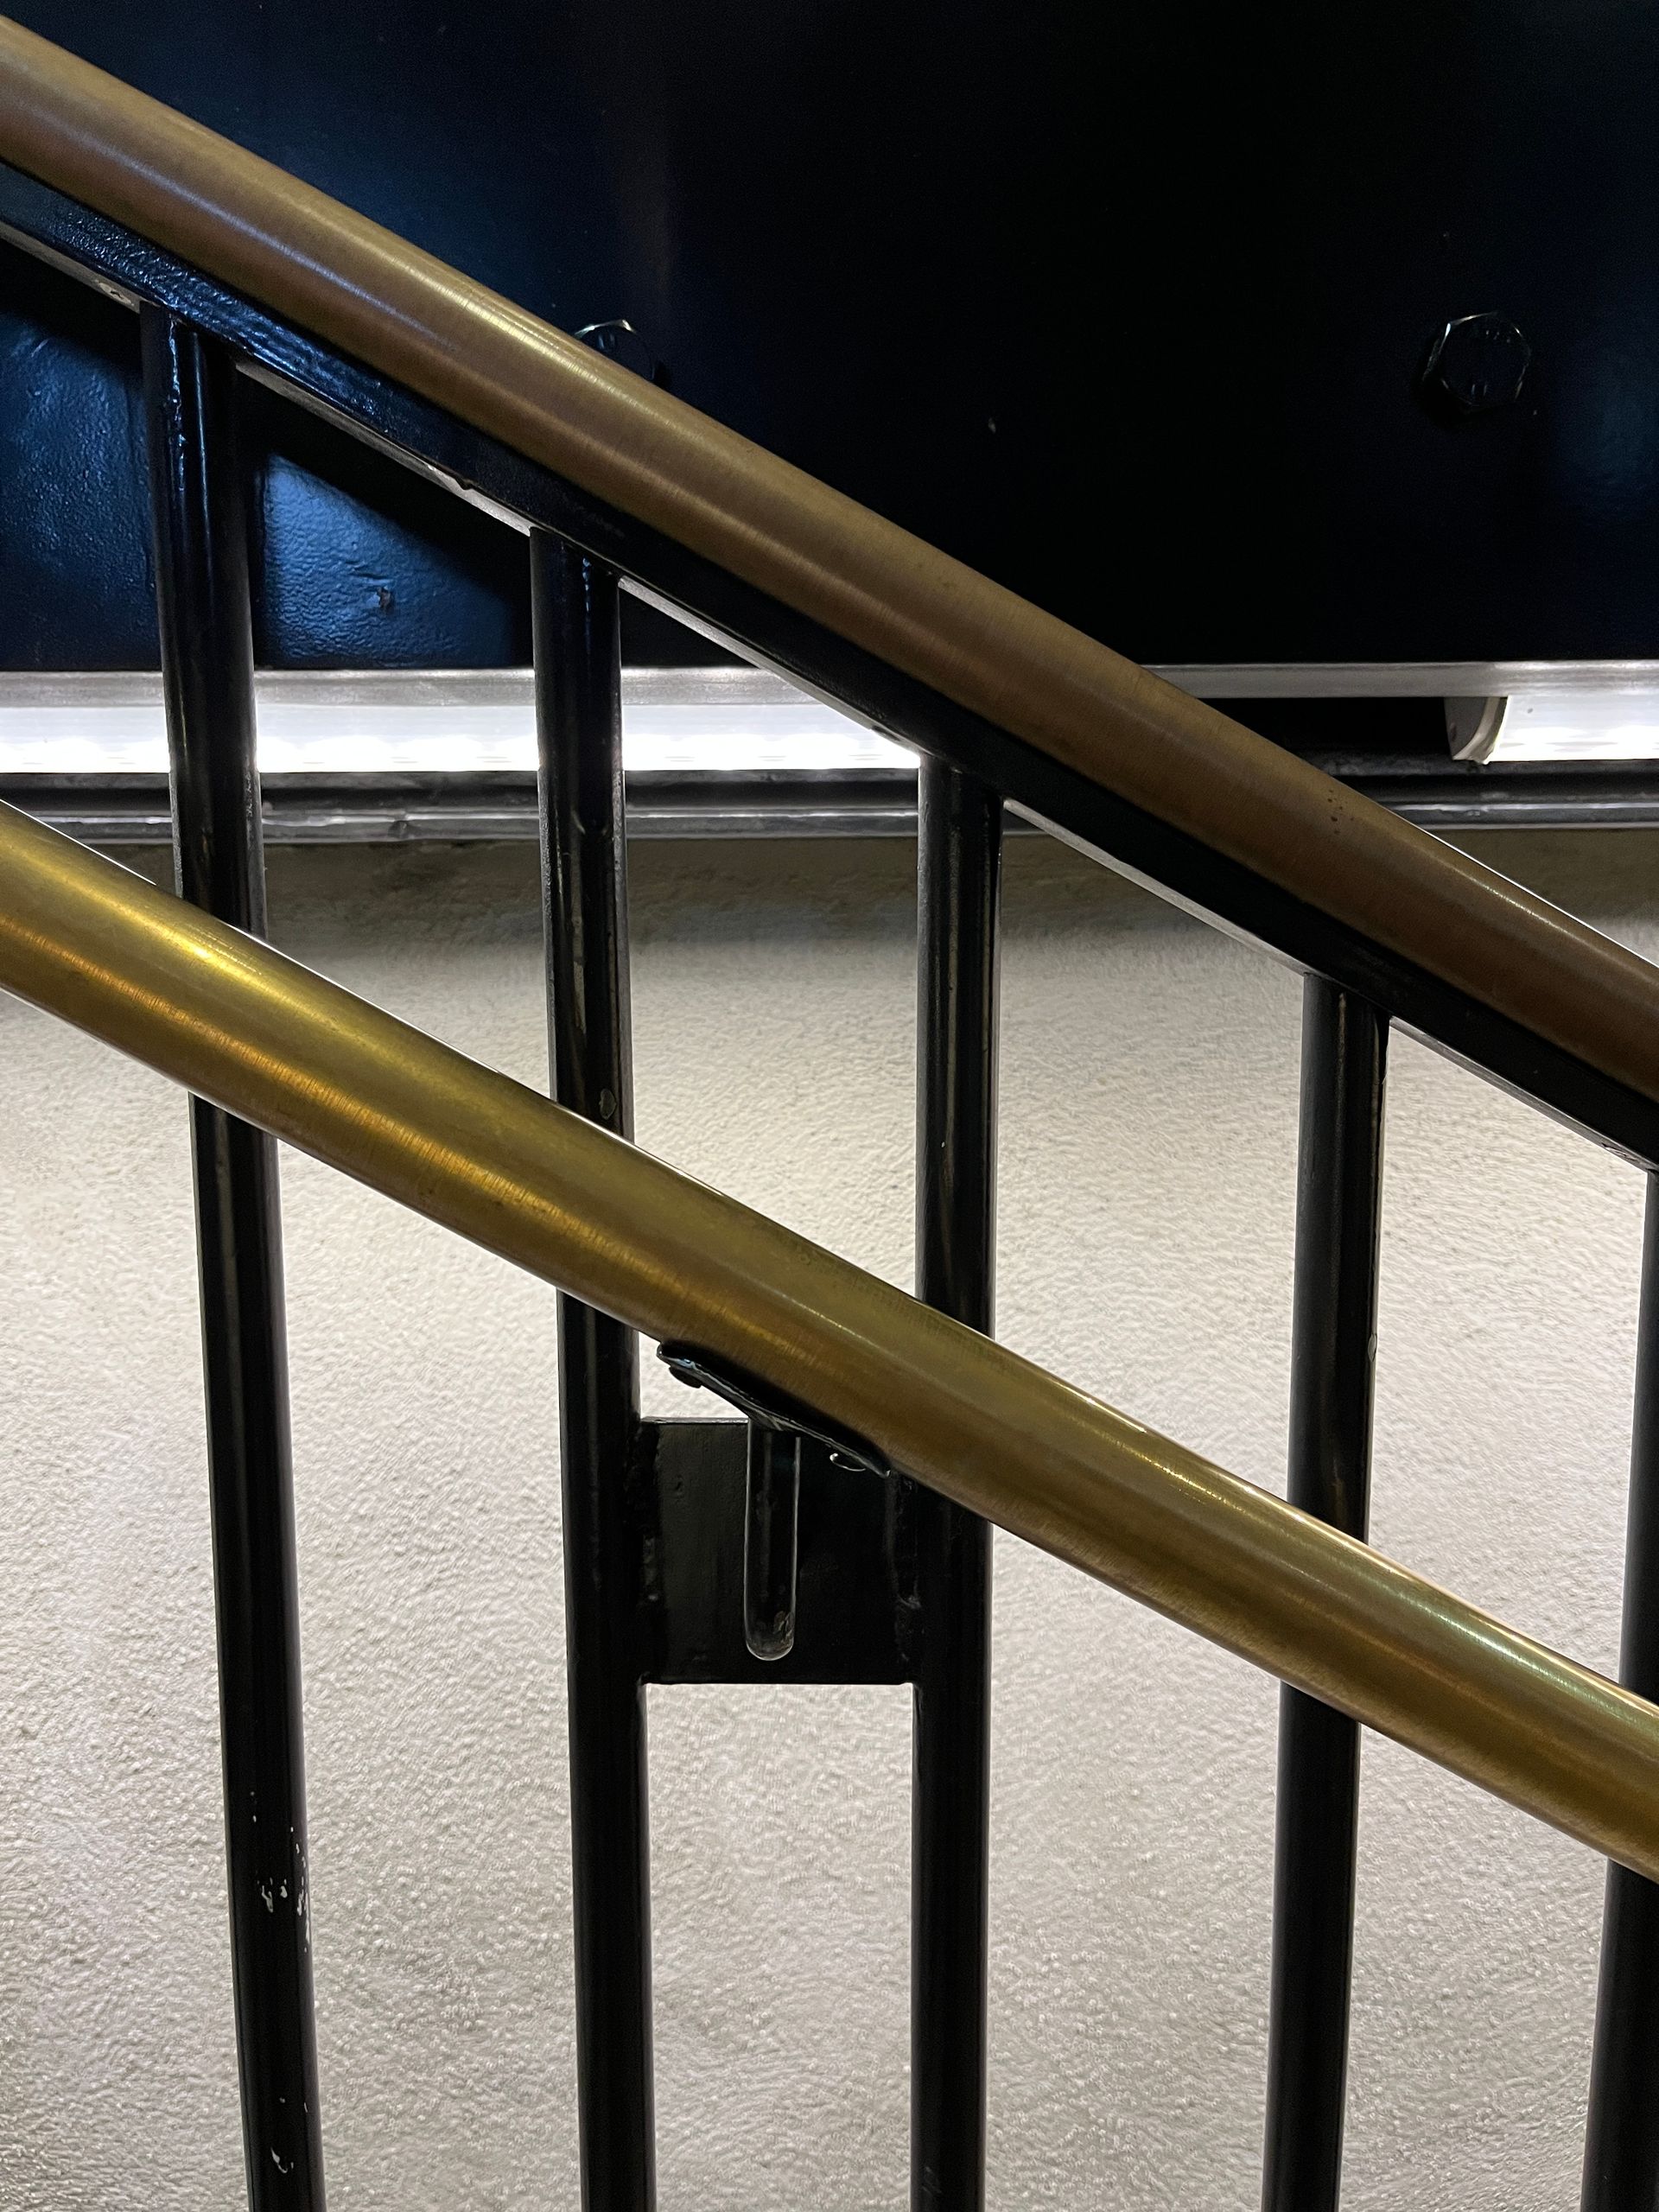 close up of metal handrail on staircase